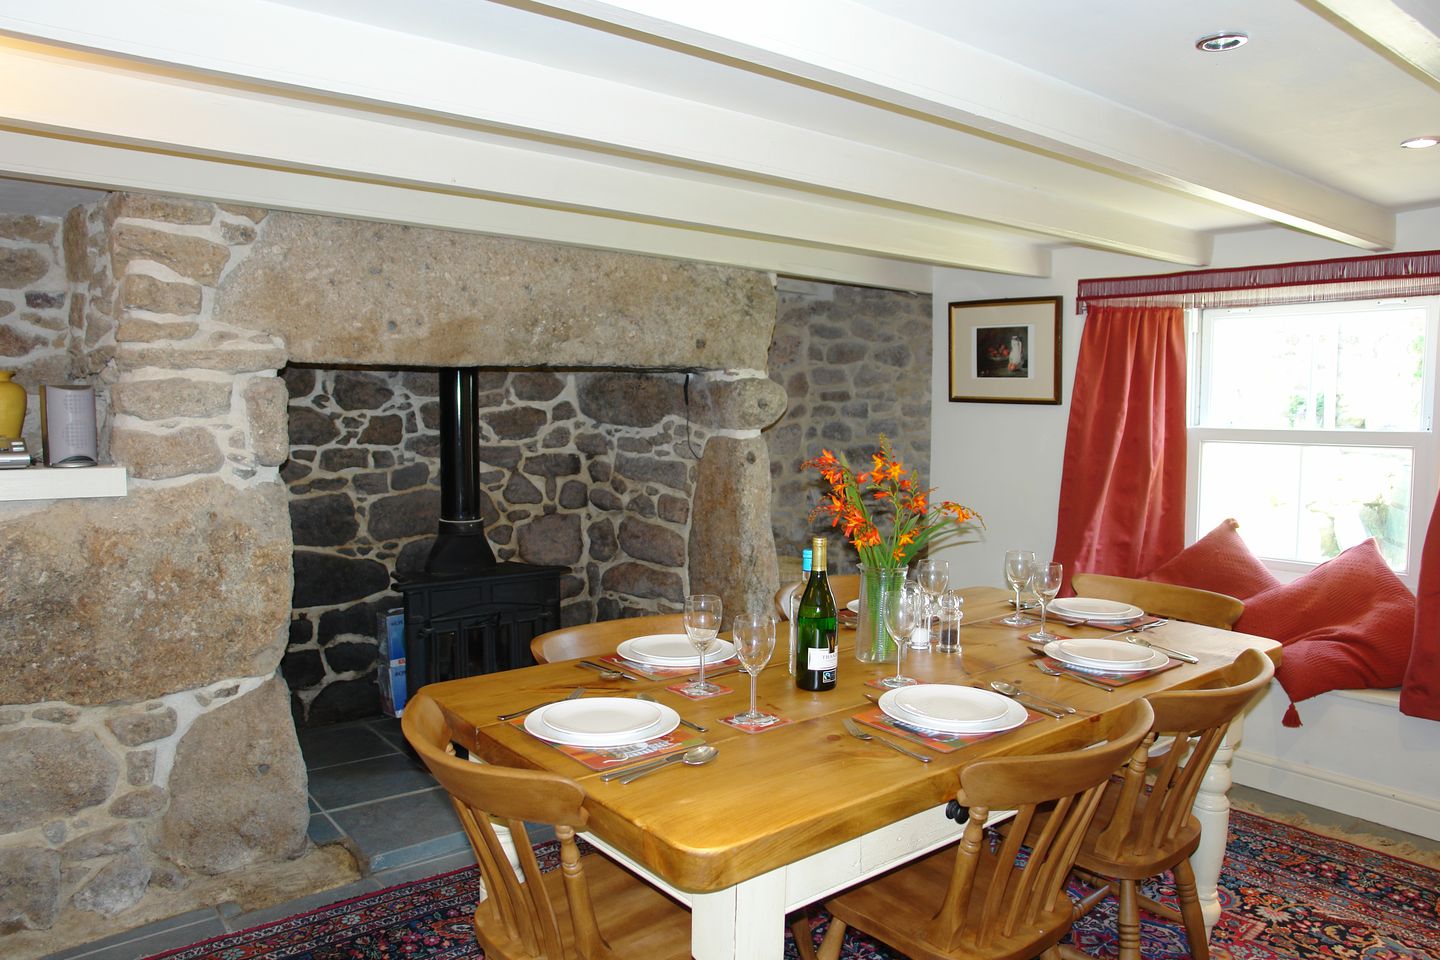 Glebe Farmhouse St Just Dining Area With Fire